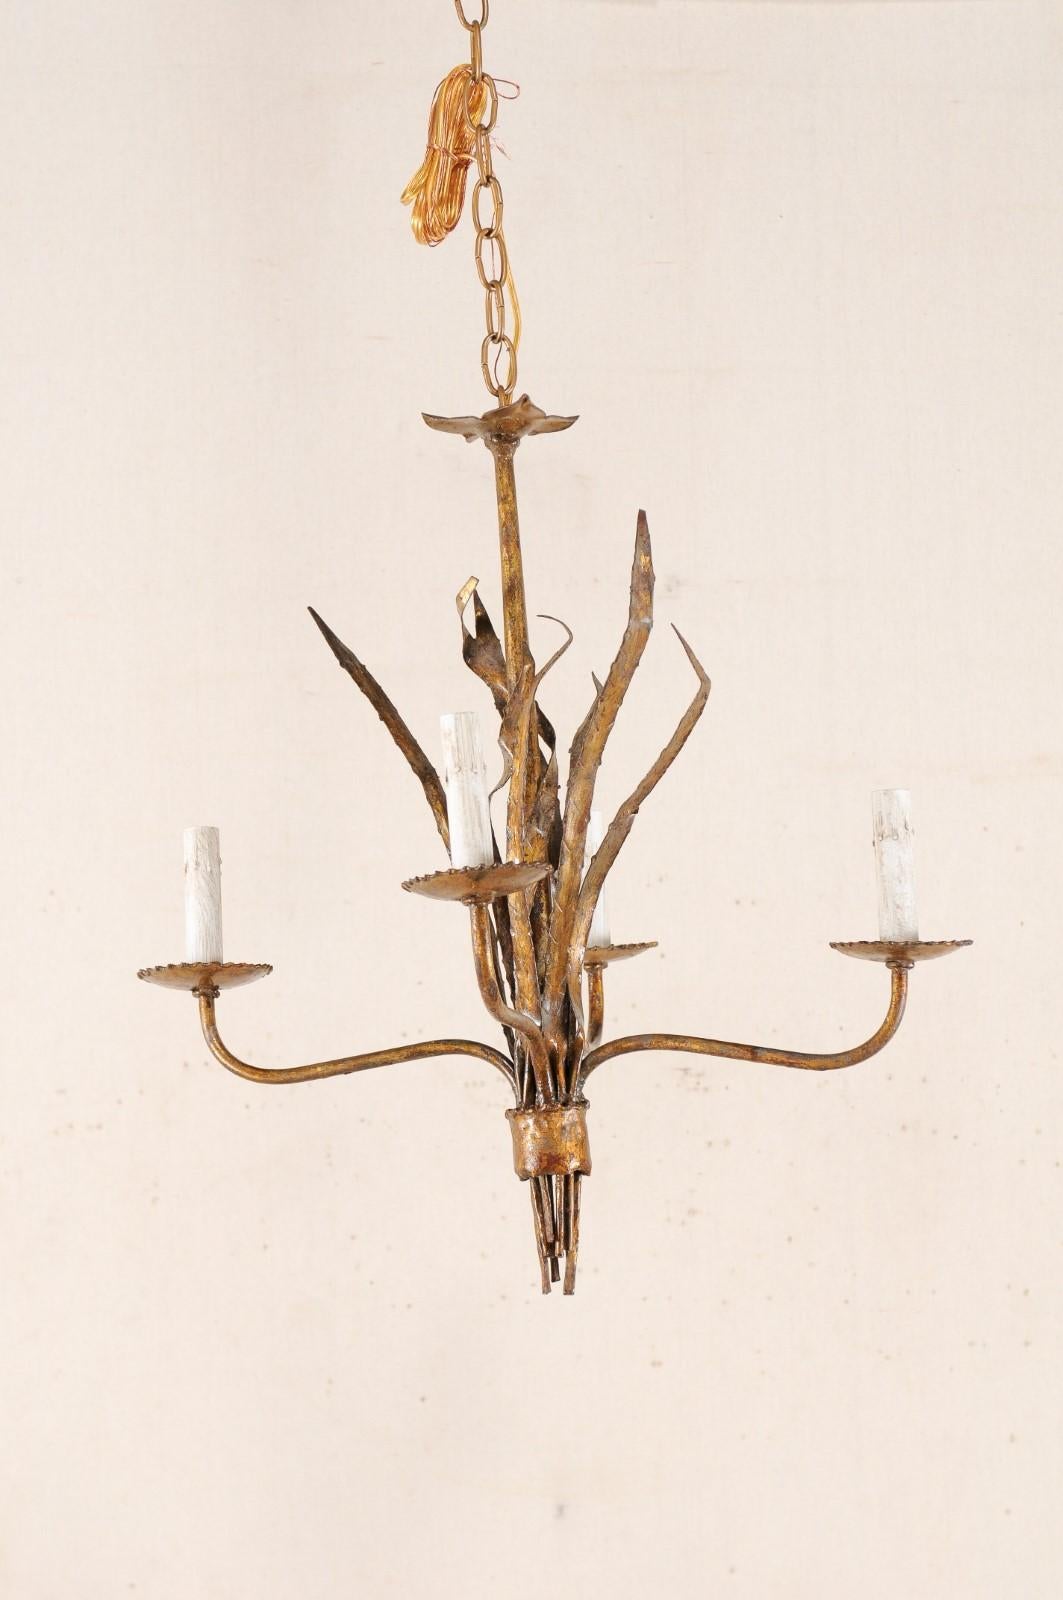 French Mid-20th Century Four-Light Iron Toned Chandelier in Leaf Foliage Motif For Sale 4